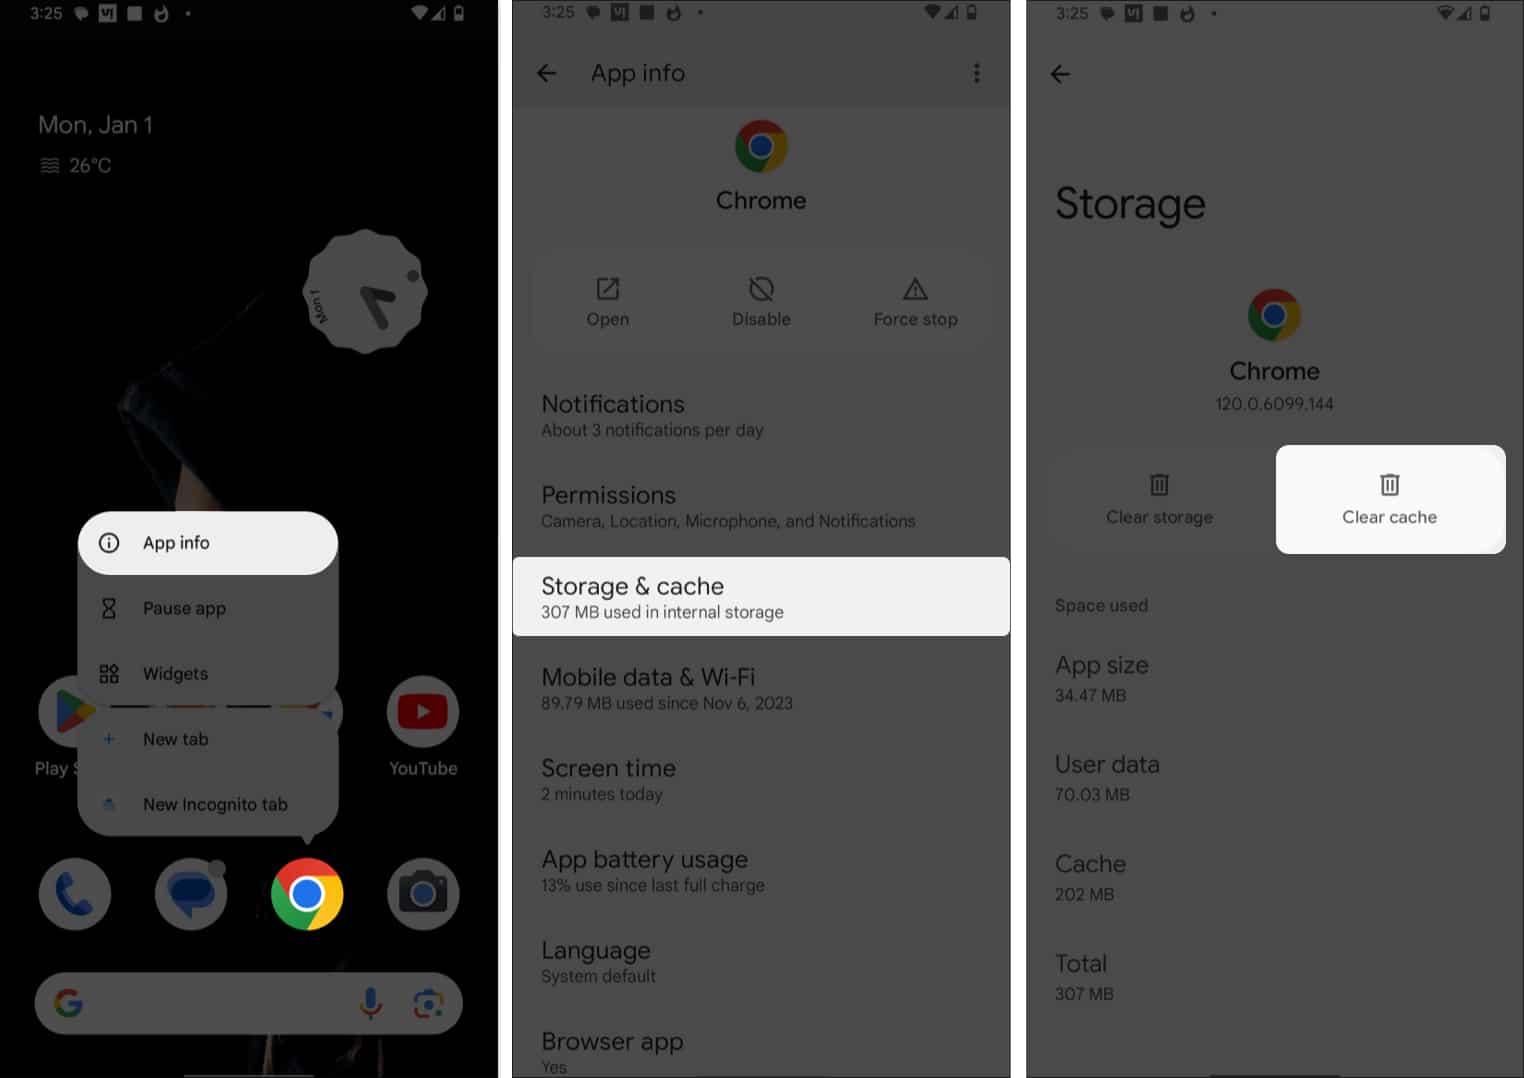 Go to chrome's App info select storage and cache and tap clear cache